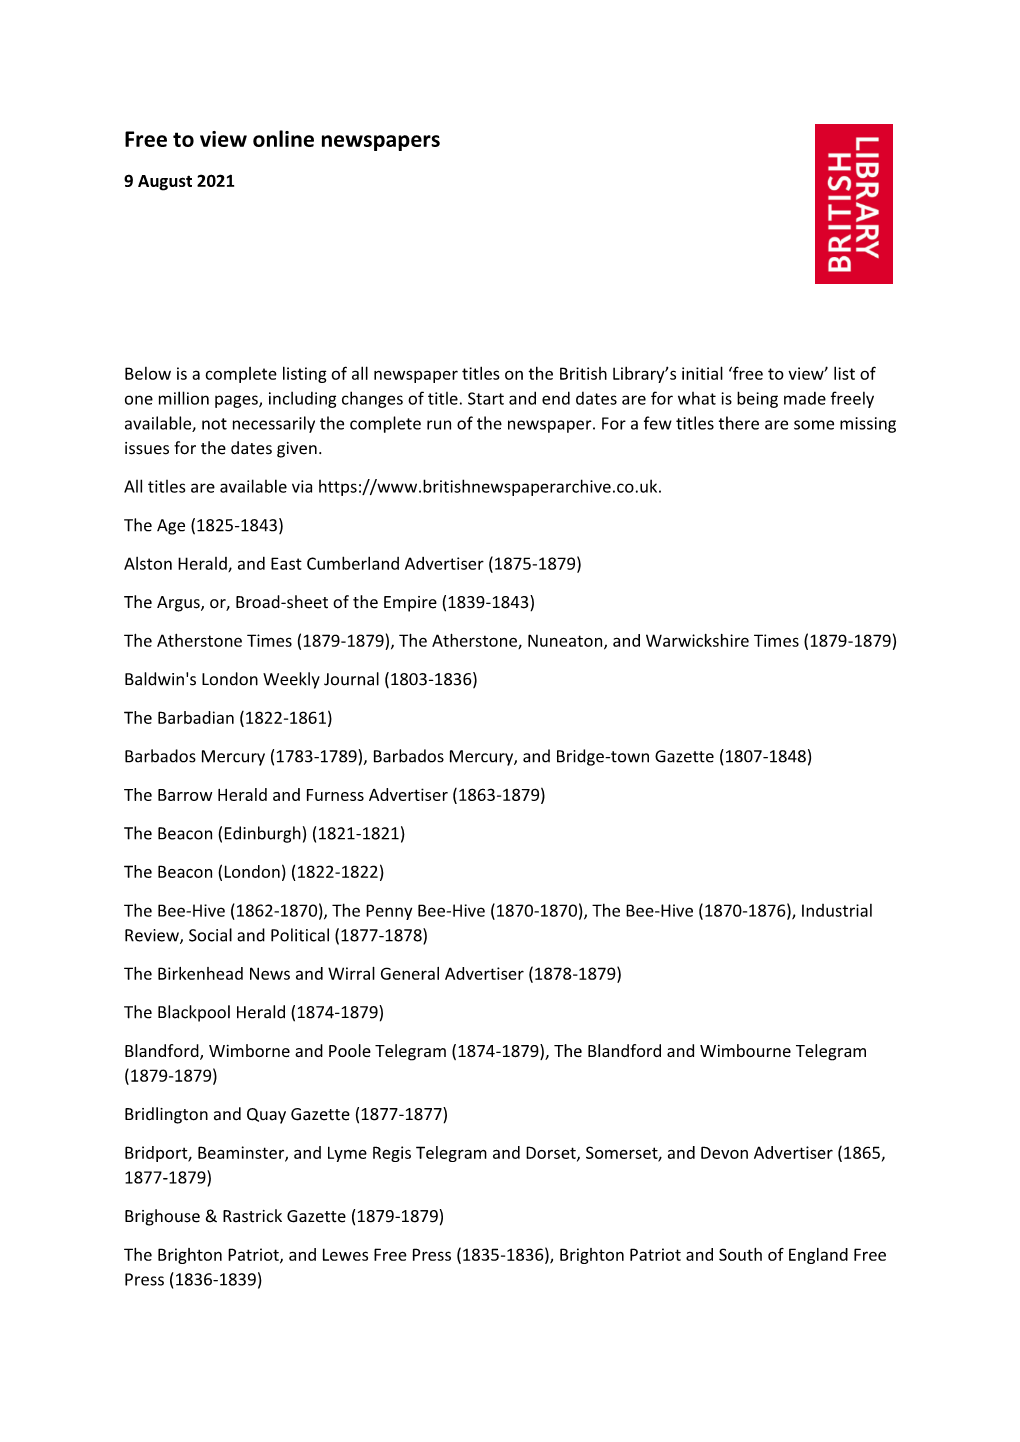 Download Free to View British Library Newspapers List 9 August 2021